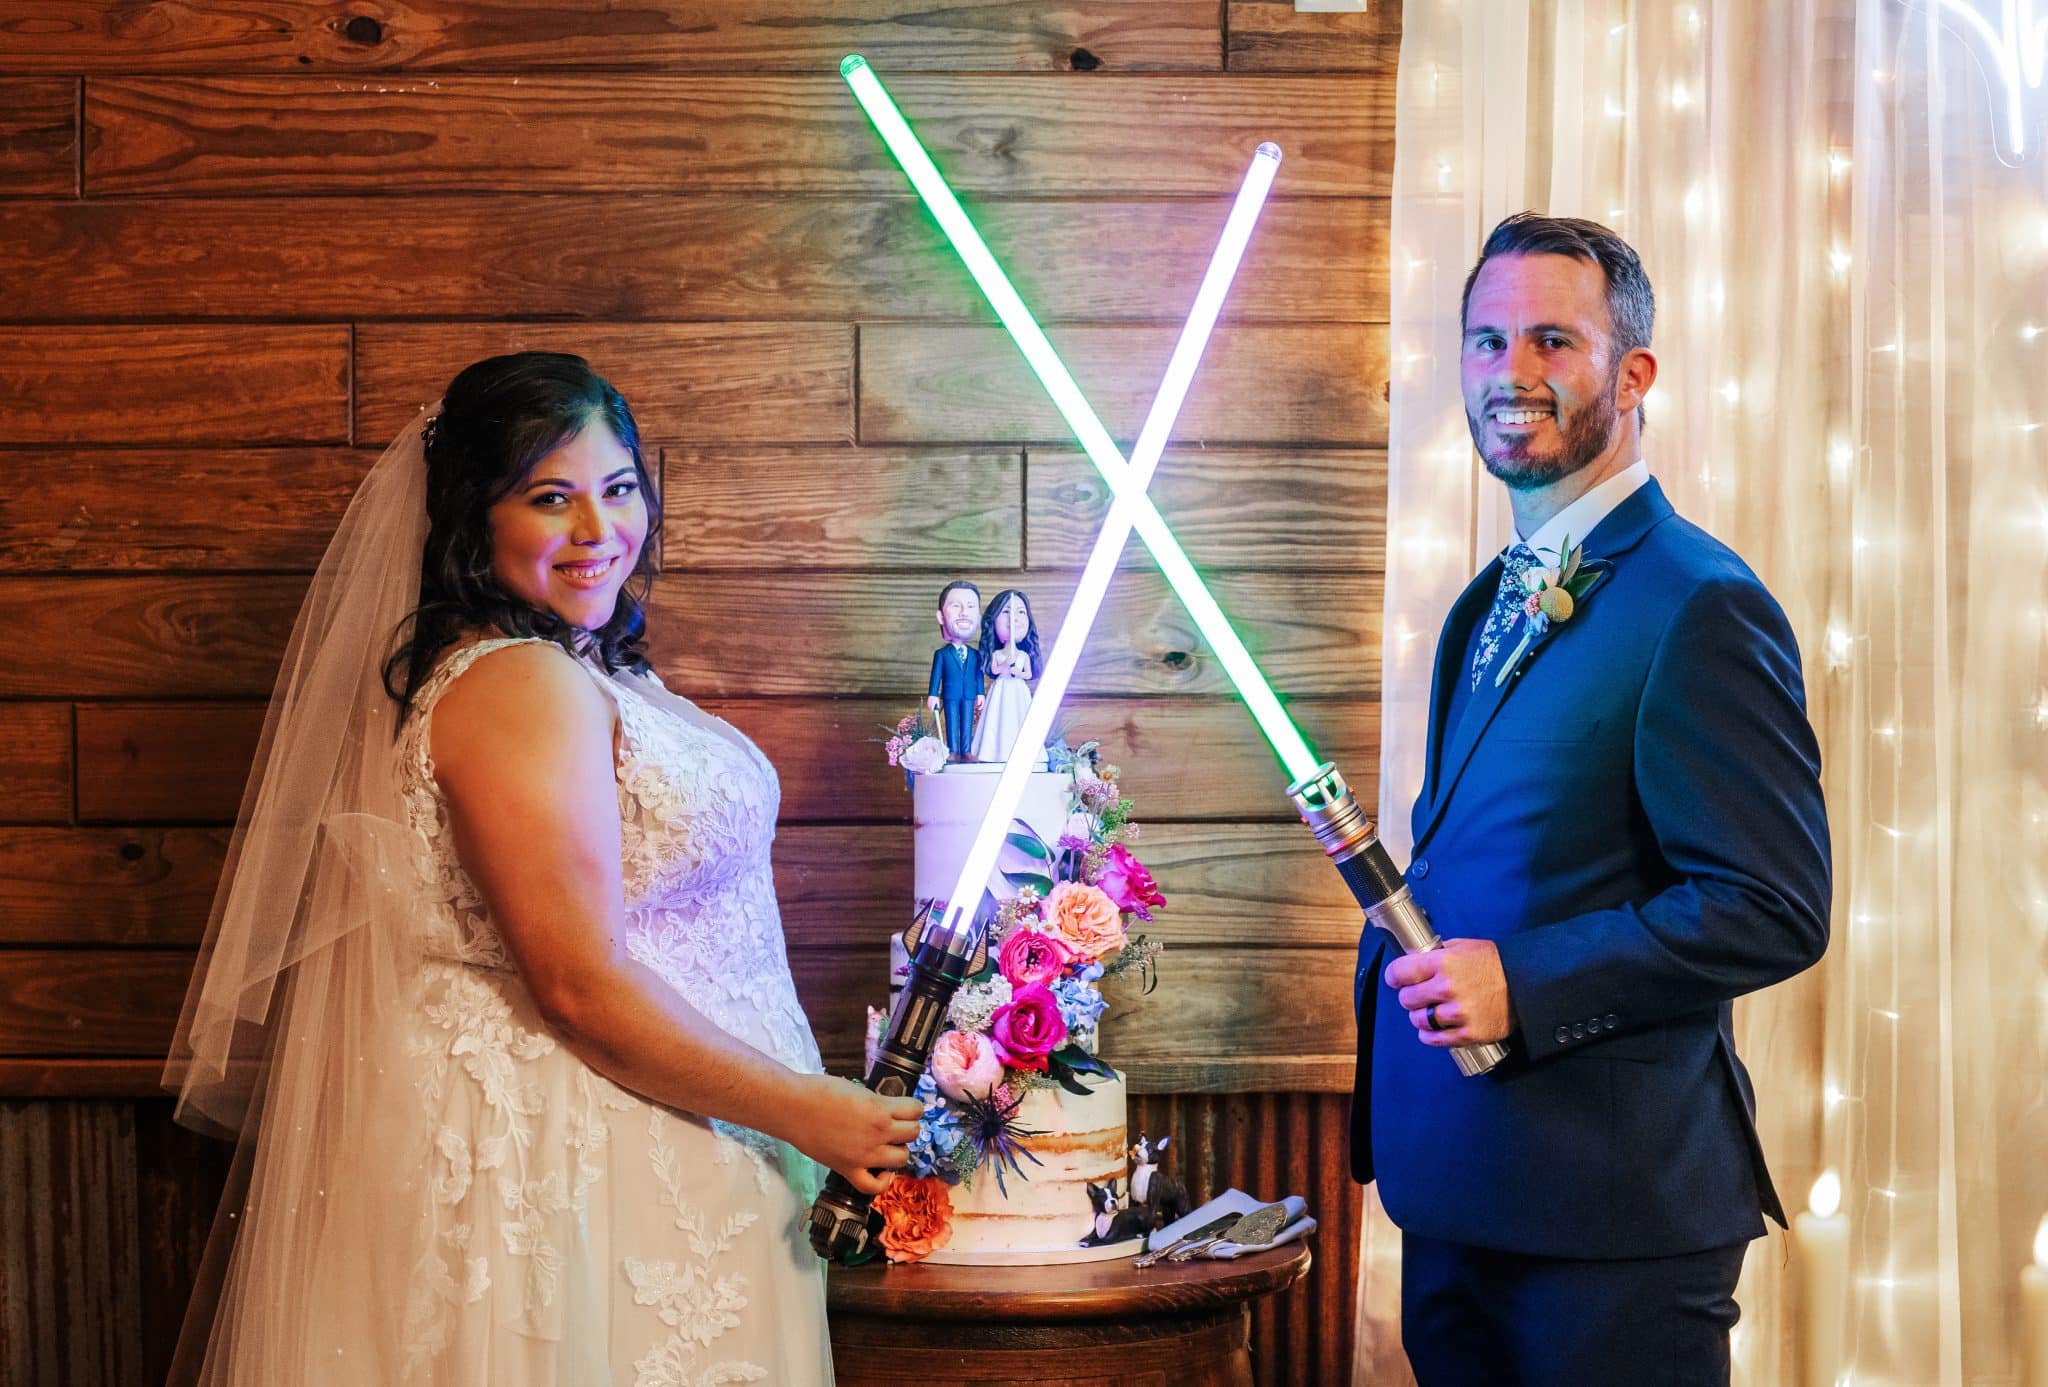 whimsical wedding at Hidden Barn Venue in Apopka, FL where bride and groom hold special light sabers they used during ceremony.